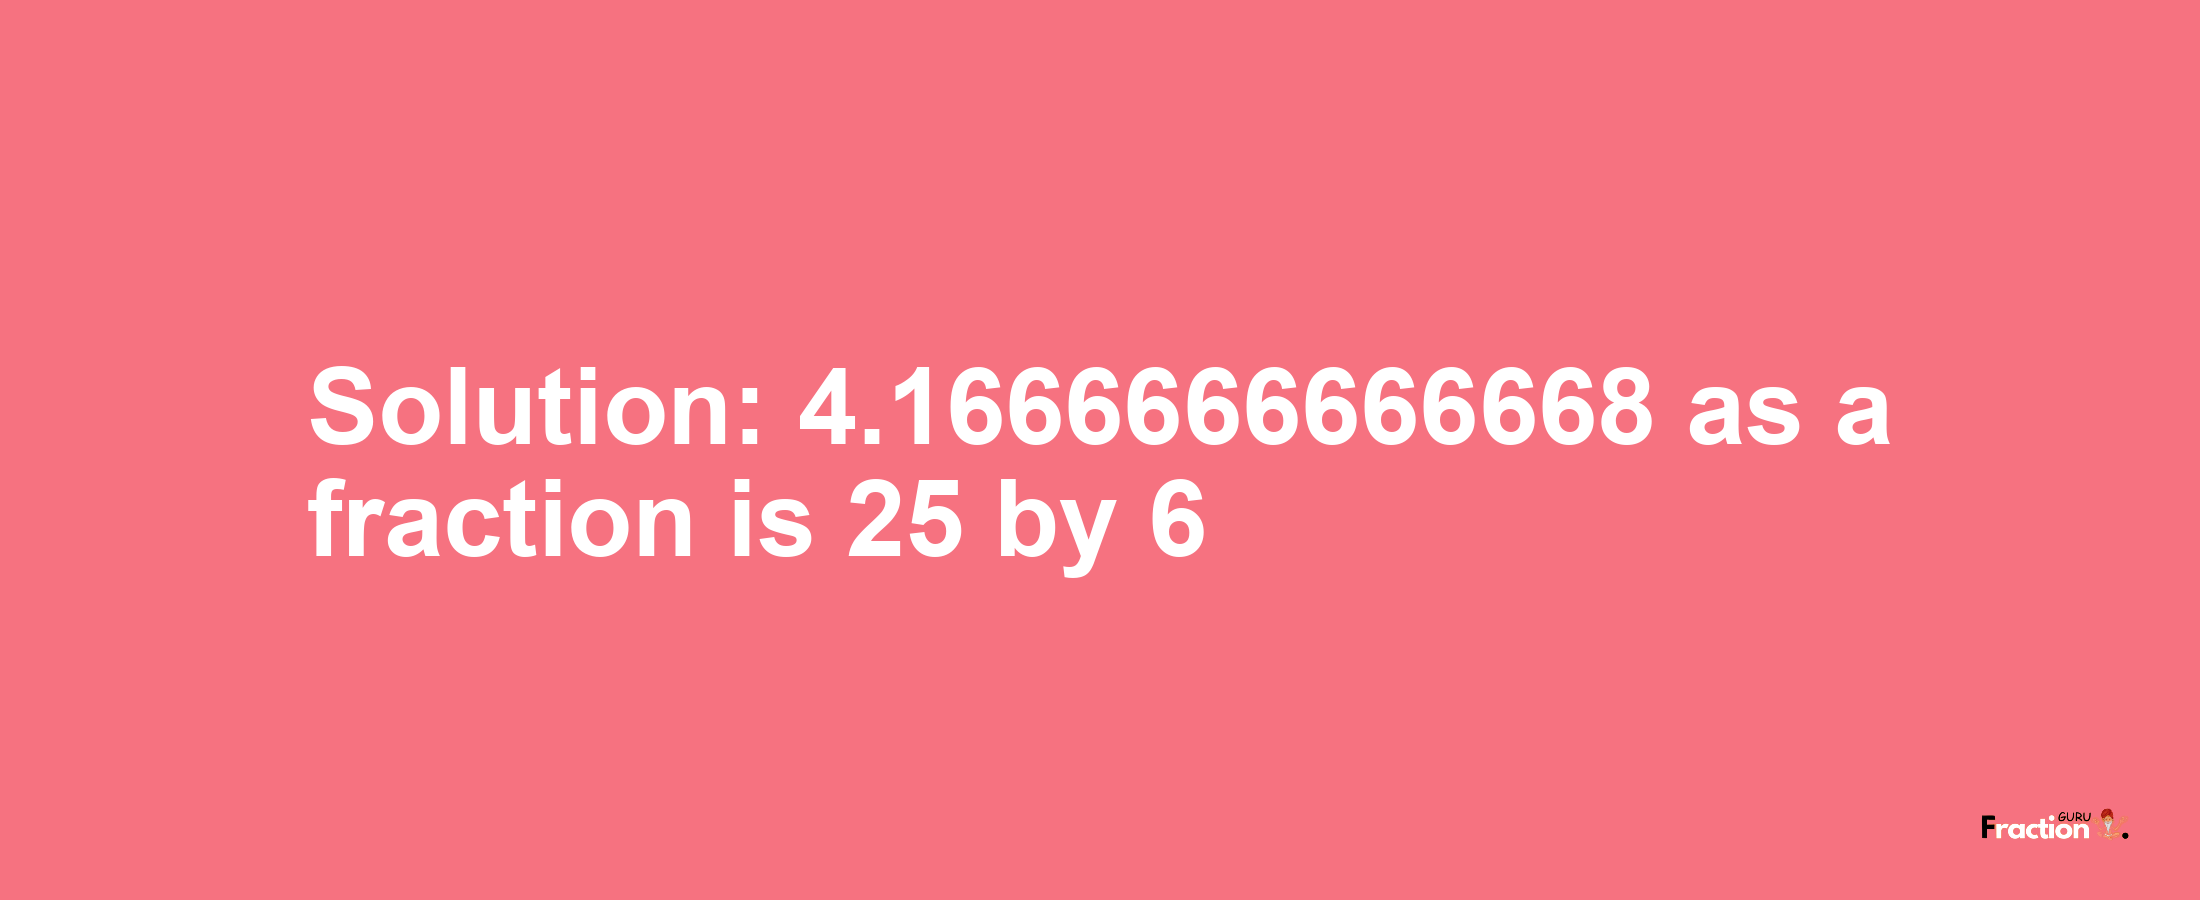 Solution:4.1666666666668 as a fraction is 25/6